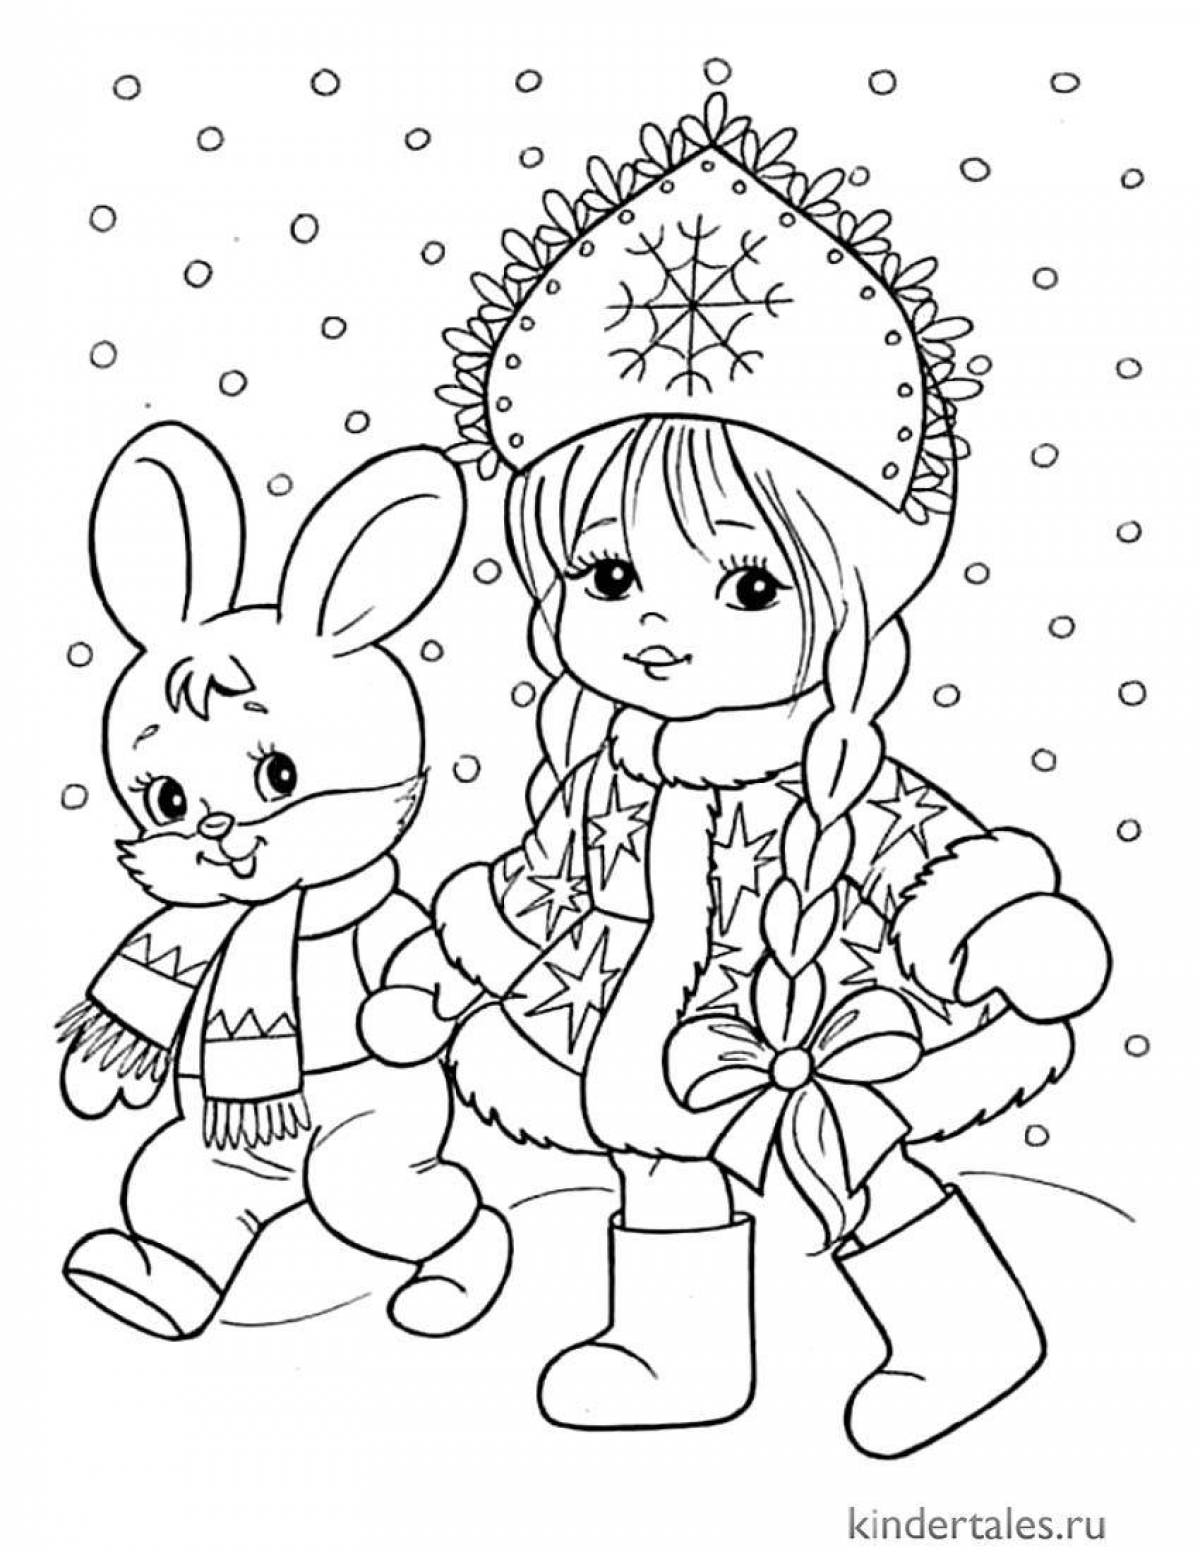 Fabulous Christmas coloring book for girls 8 years old